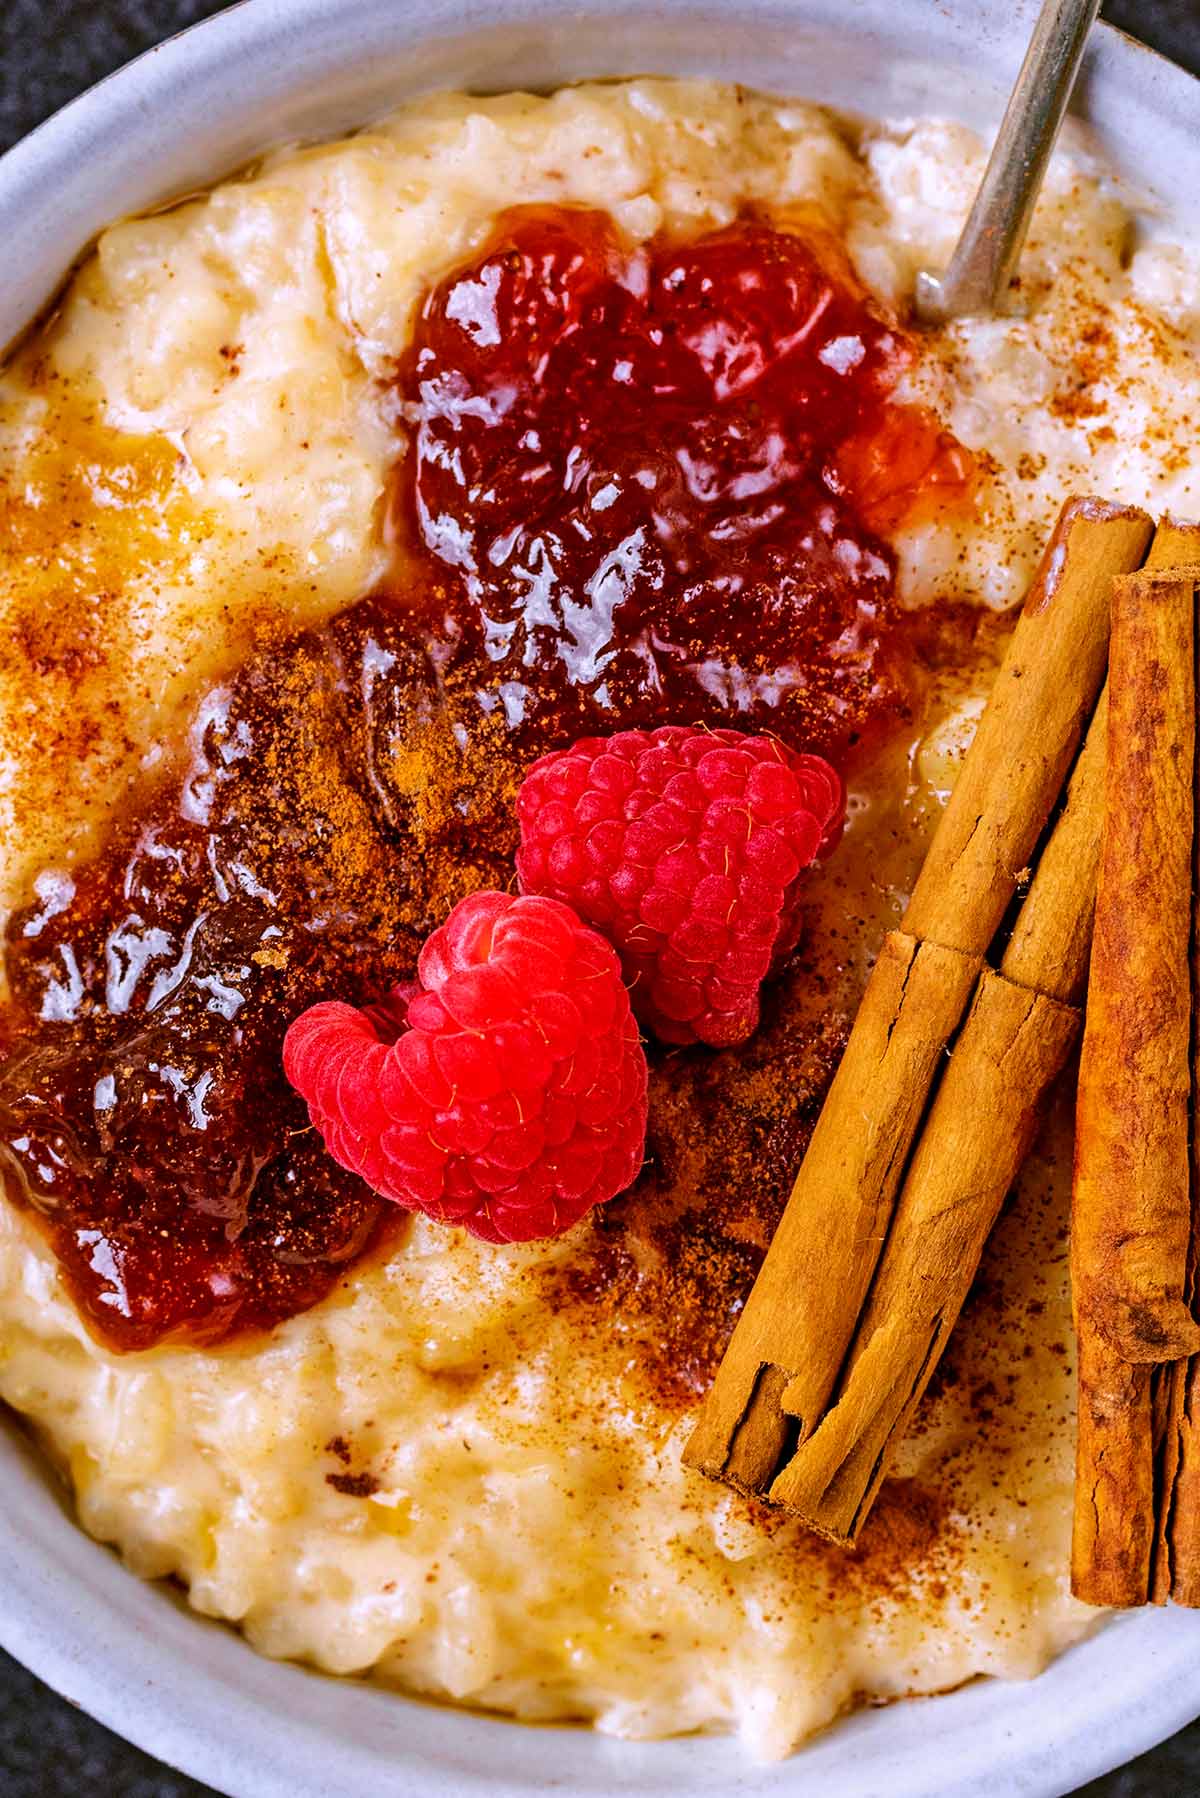 A dollop of jam, two raspberries and some cinnamon sticks on top of some rice pudding.